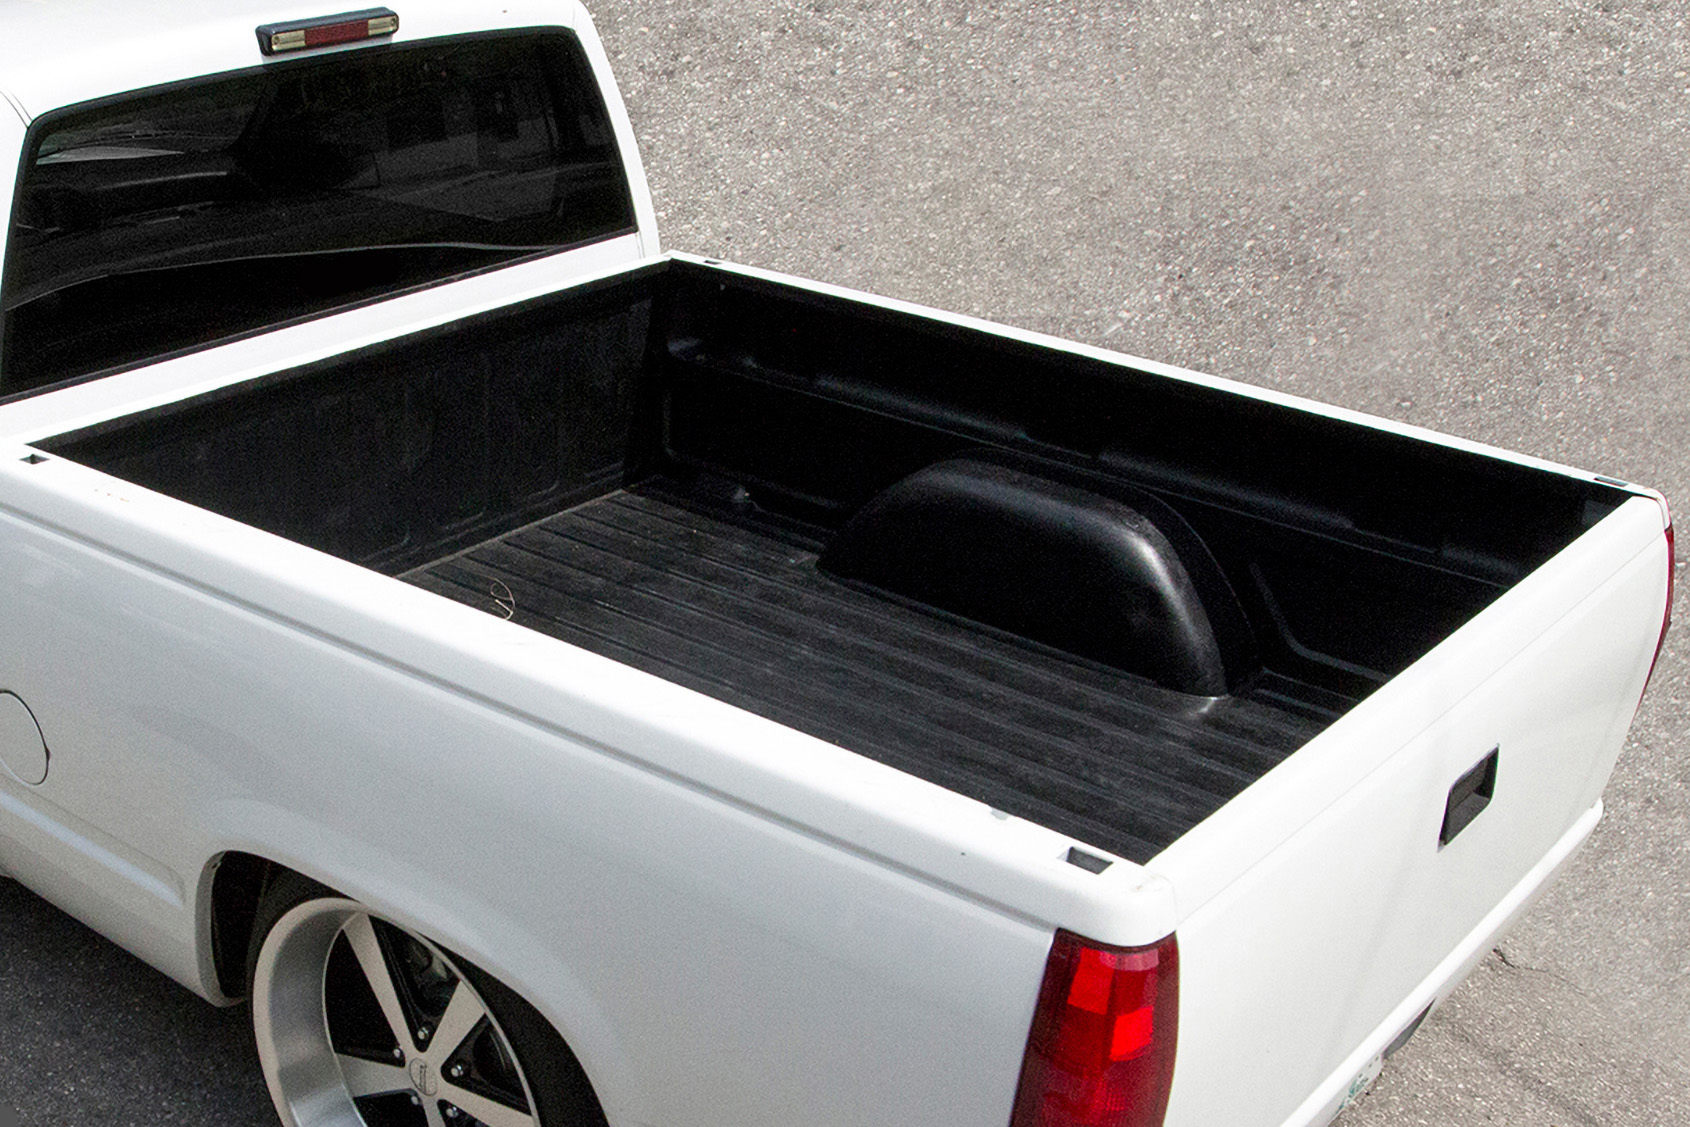 Featured Product: This Easy to Apply KBS Bed Liner Protects Truck Beds and Body Panels And You Can Do It At Home!